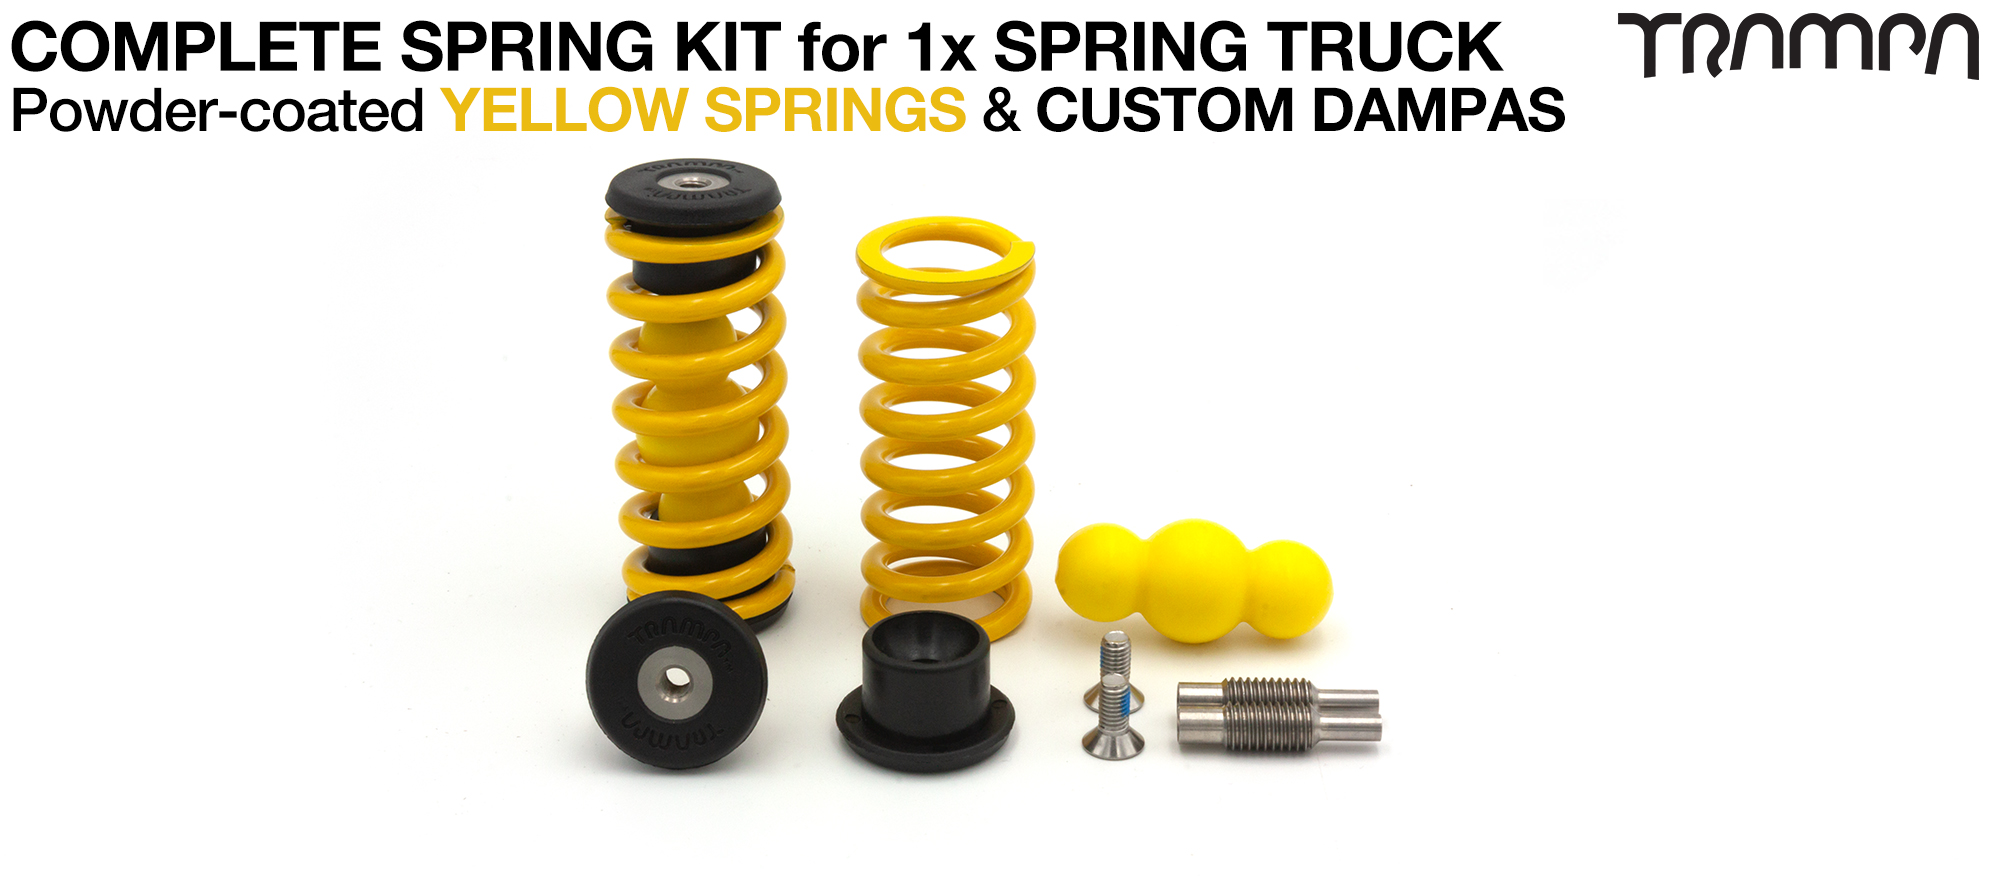 Spring kit Complete for 1x Truck - 2x Spring 2x Dampa 4x Spring Retainers 2x Spring Adjuster & 2 M5x12mm Countersunk Bolt YELLOW Springs